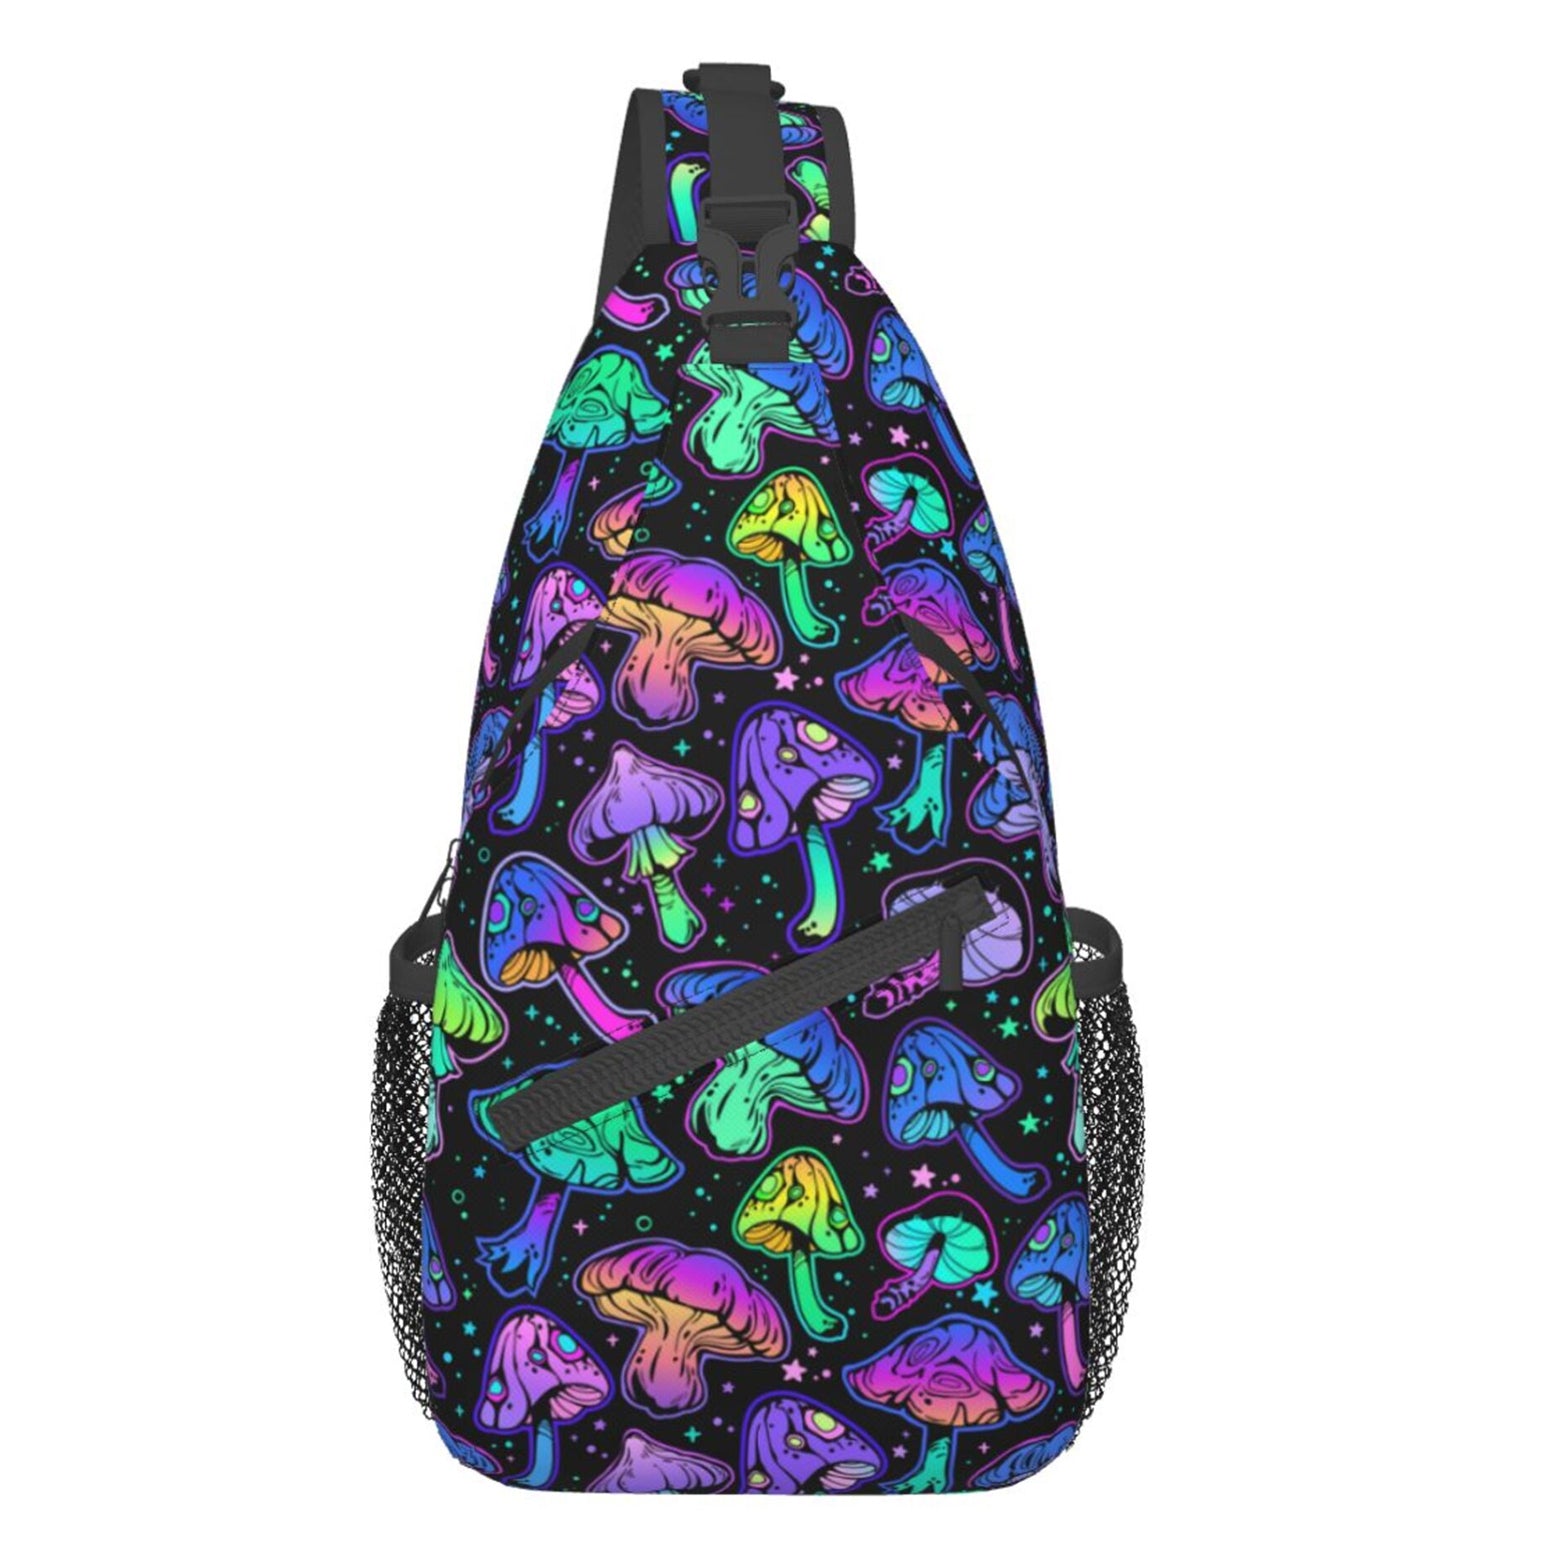 Unisex Vibrant Psychedelic Mushroom Sling Bag - A Fun Festival Companion or Perfect for Everyday Use